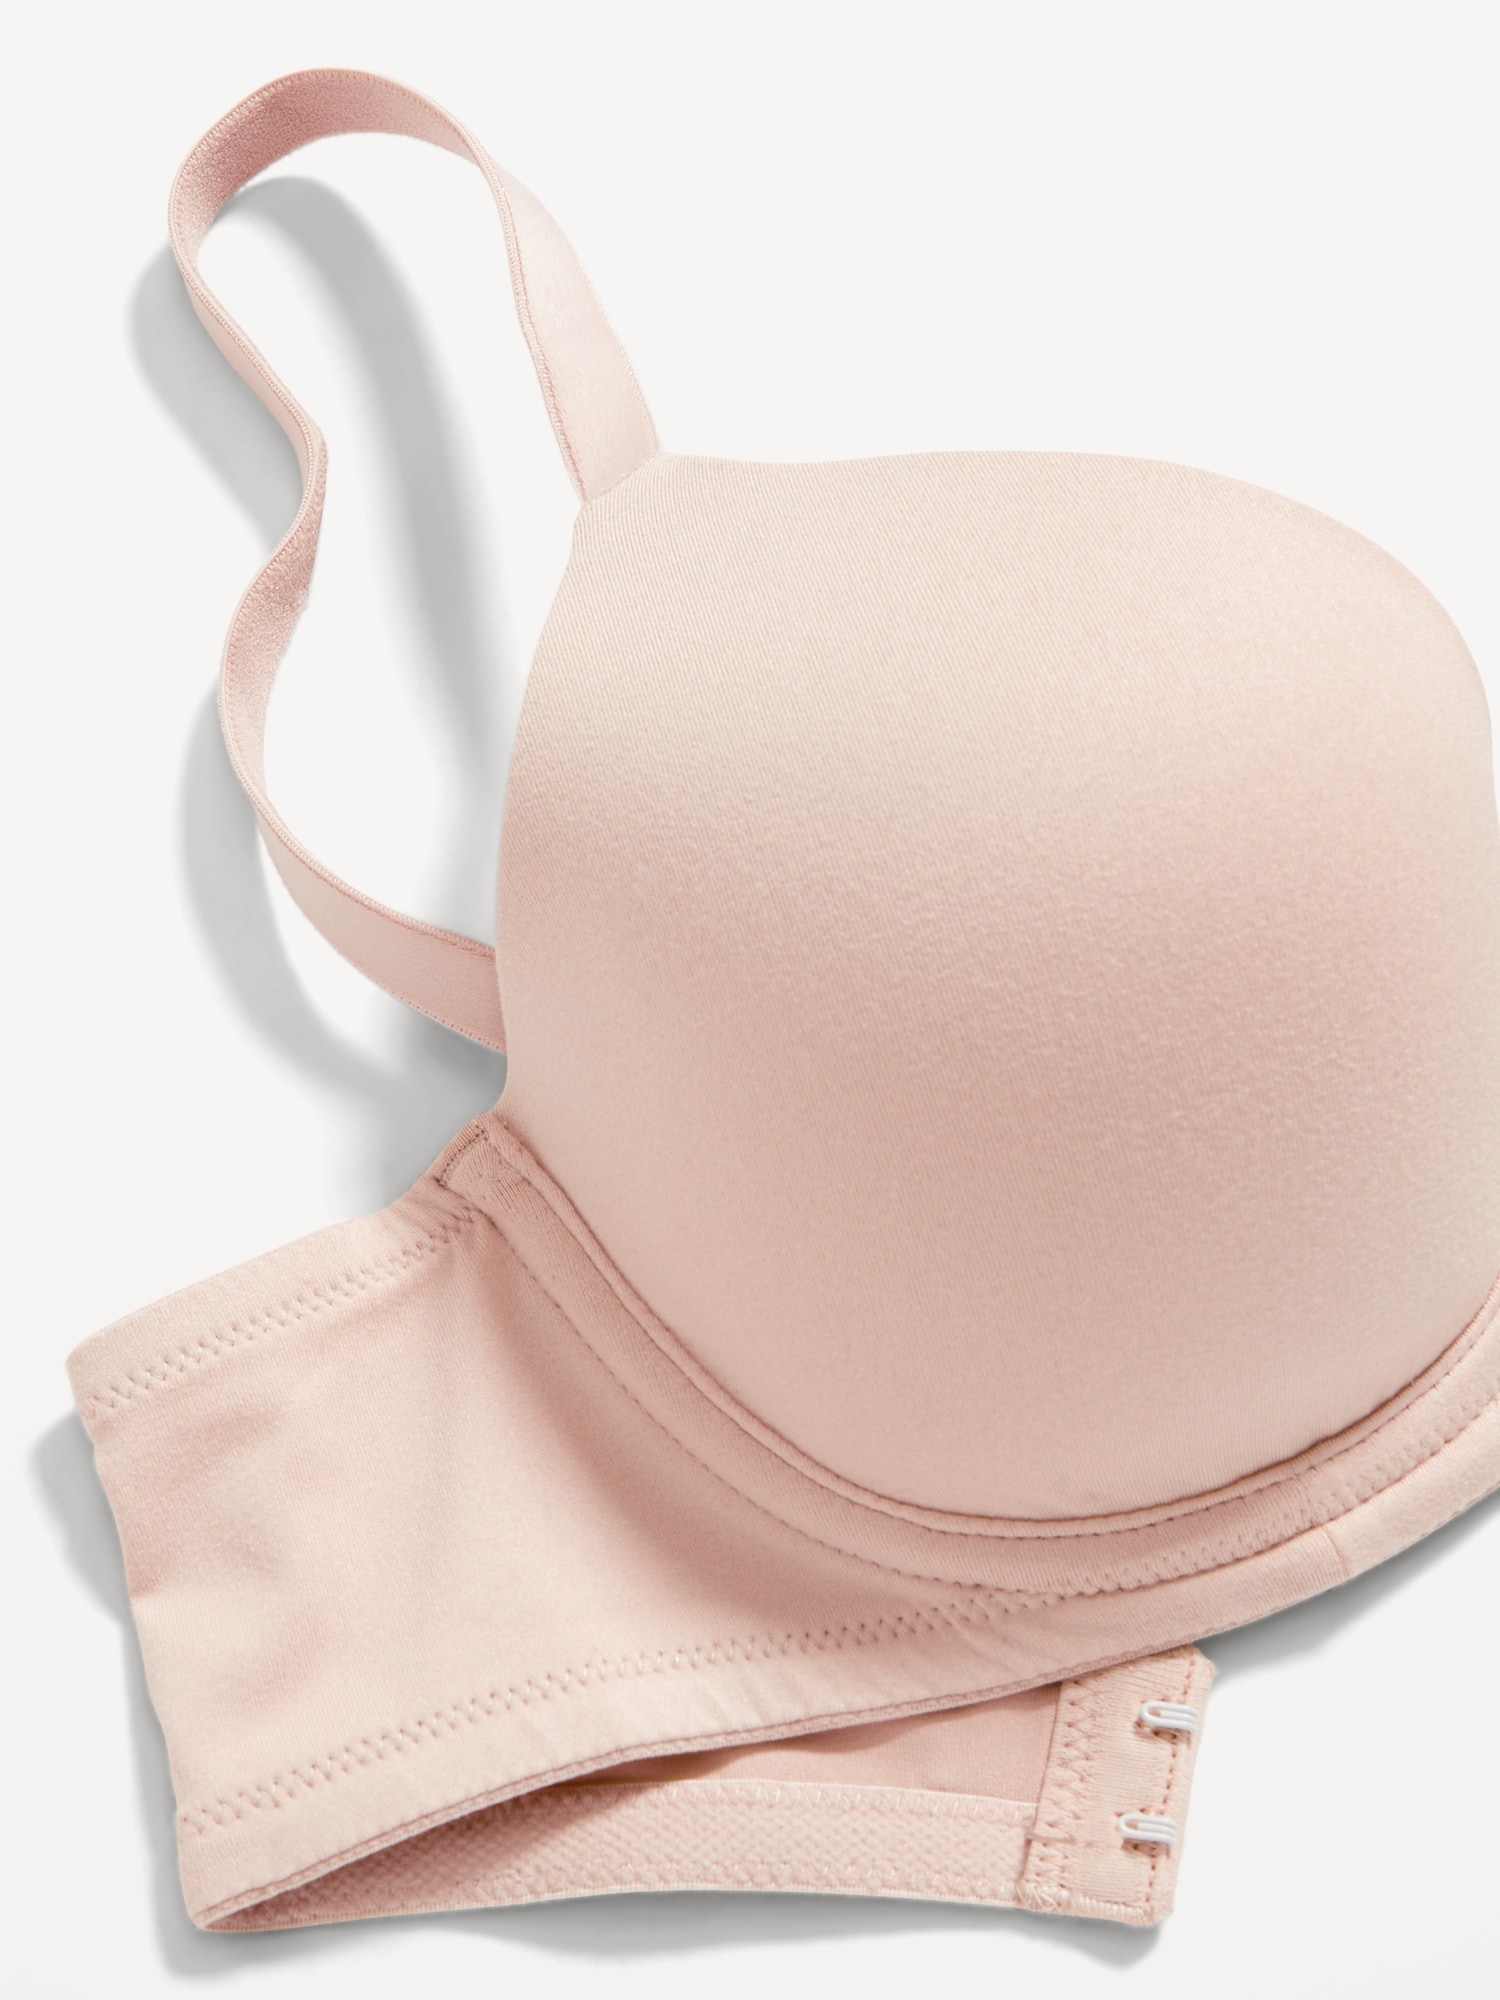 Buy Level 3 Push-up Underwired Demi Cup Bra in Baby Pink Online